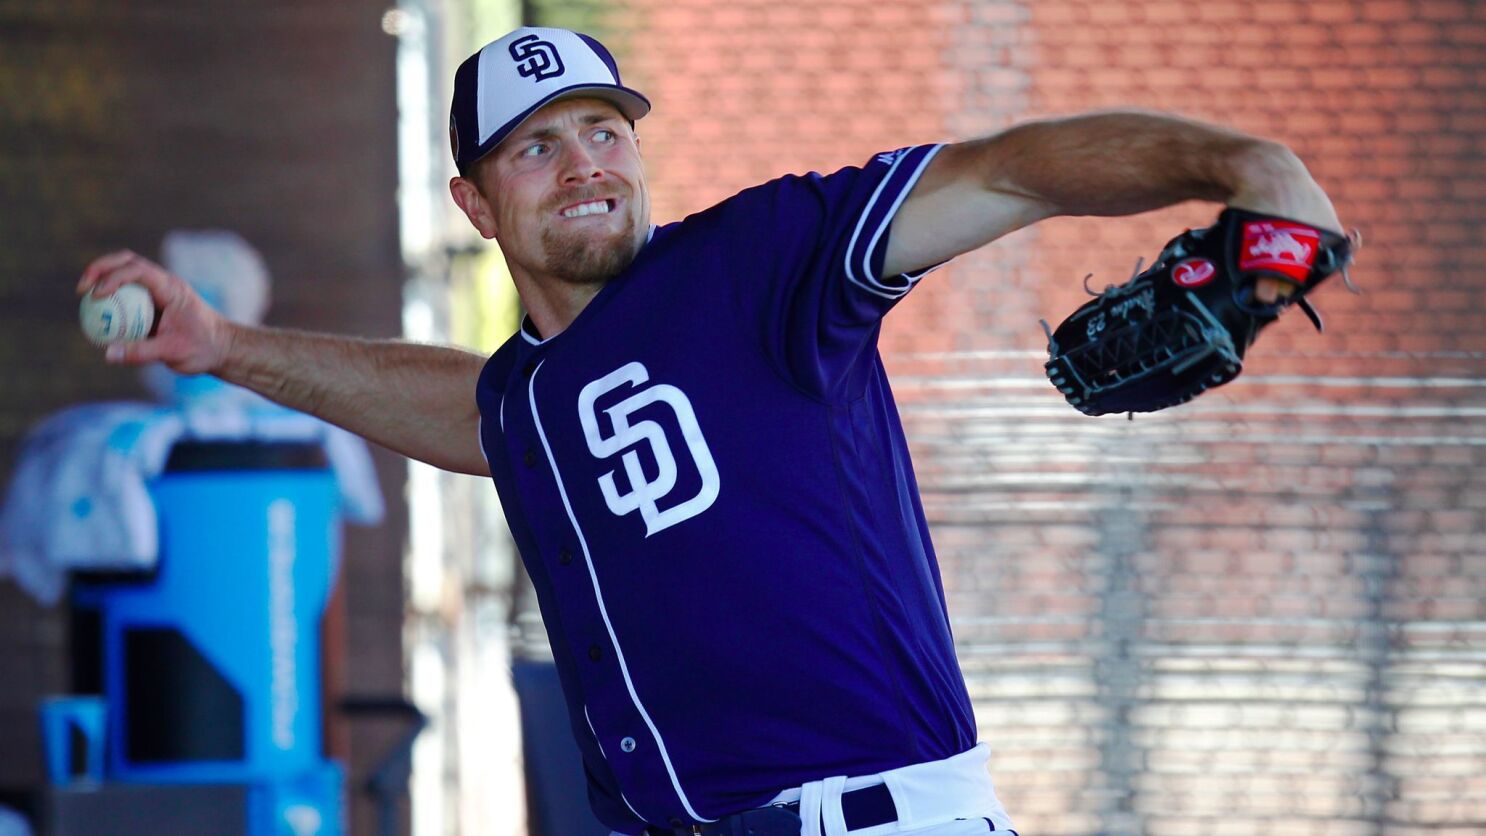 Padres spring training primer: Infielders - The San Diego Union